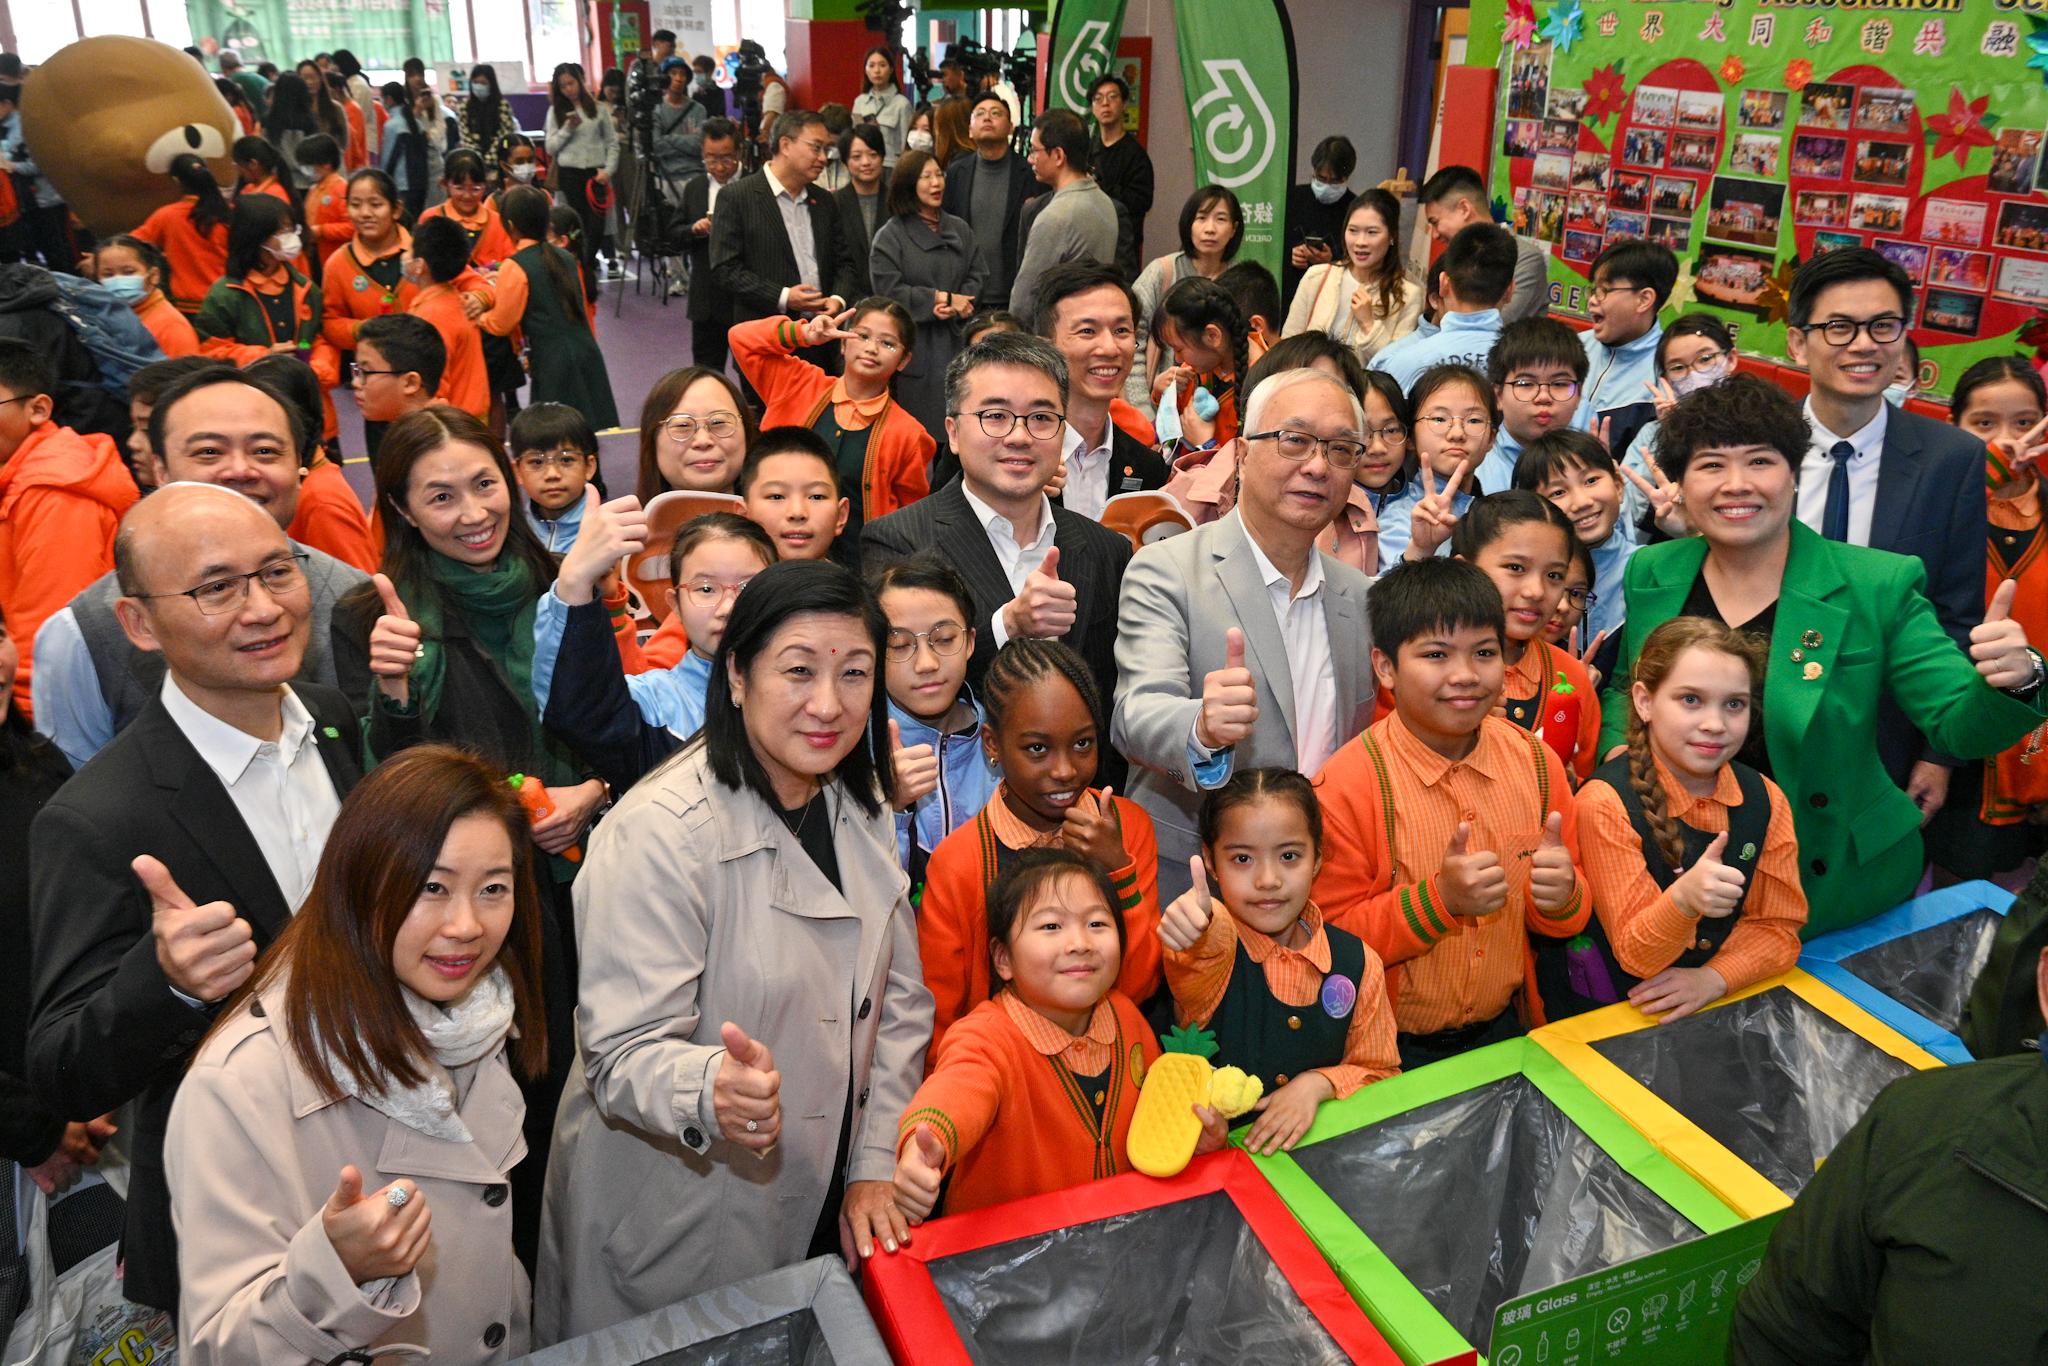 The Secretary for Environment and Ecology, Mr Tse Chin-wan, and the Under Secretary for Education, Mr Sze Chun-fai, today (January 16) visited the the Yaumati Kaifong Association School to promote municipal solid waste charging to students. Photo shows Mr Tse (second row, third right) and Mr Sze (second row, fourth right) with teachers and students of the school.